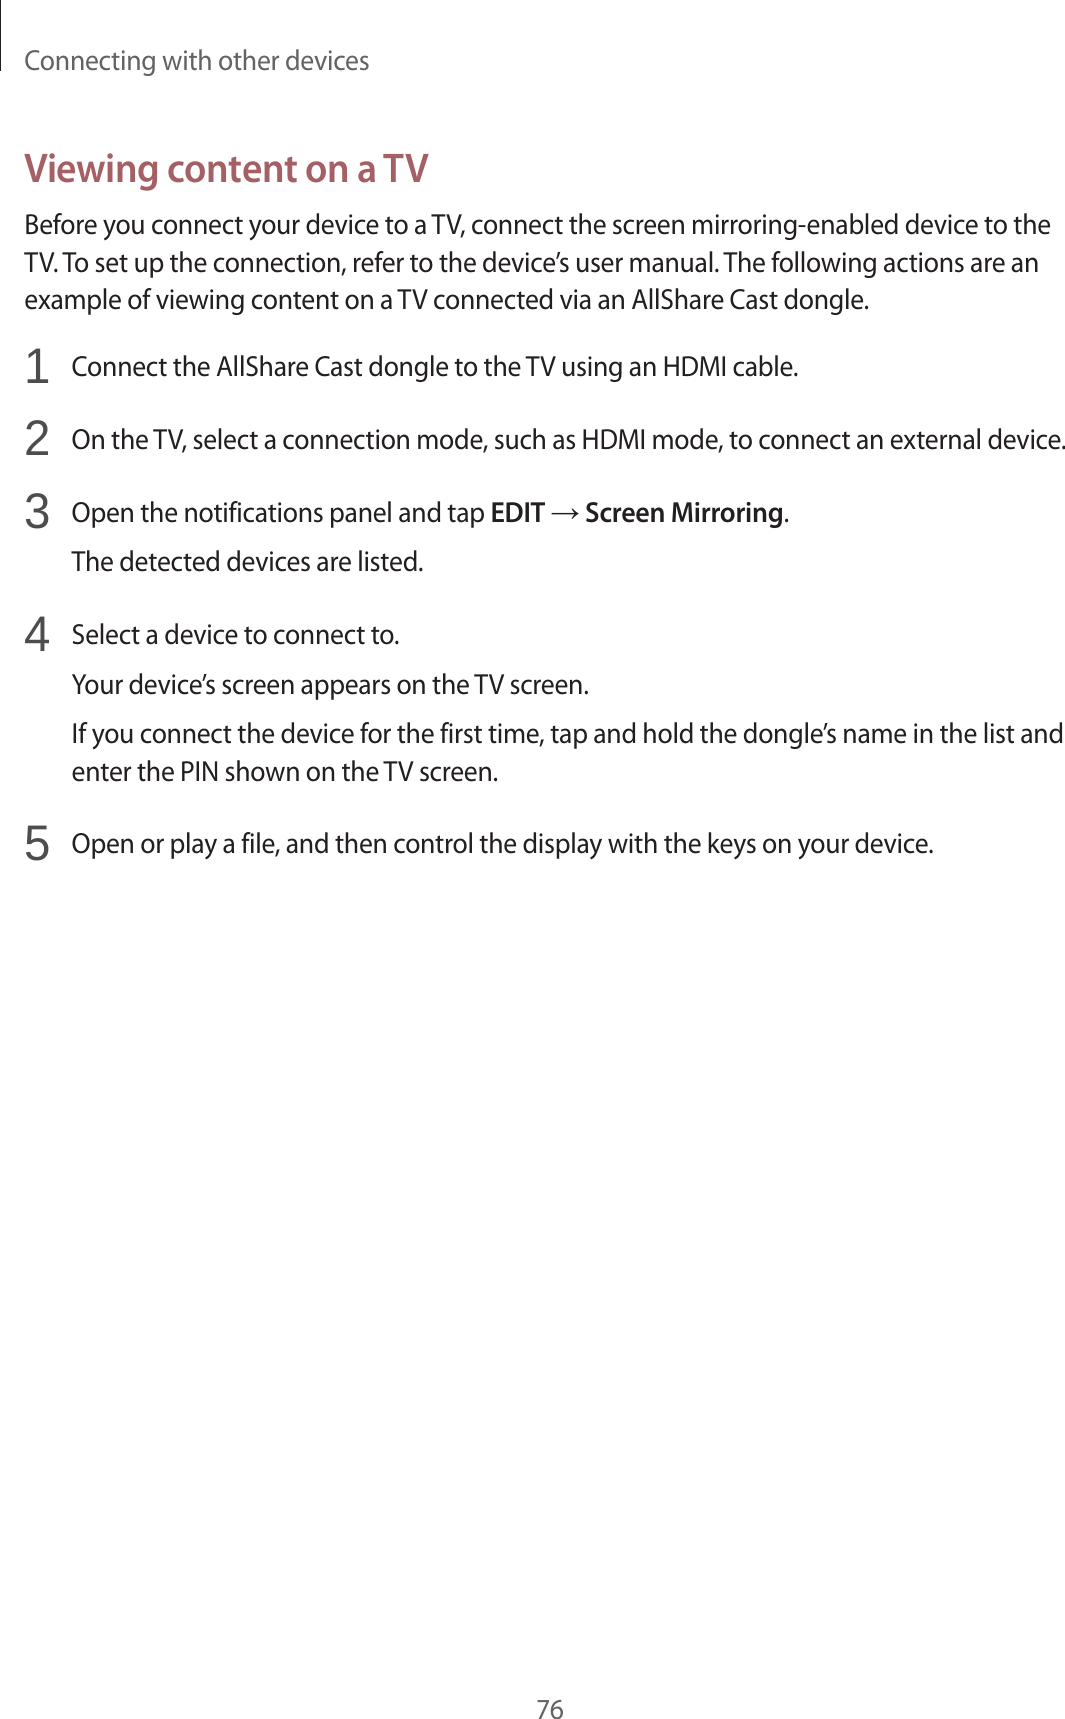 Connecting with other devices76Viewing content on a TVBefore you connect your device to a TV, connect the screen mirroring-enabled device to the TV. To set up the connection, refer to the device’s user manual. The following actions are an example of viewing content on a TV connected via an AllShare Cast dongle.1  Connect the AllShare Cast dongle to the TV using an HDMI cable.2  On the TV, select a connection mode, such as HDMI mode, to connect an external device.3  Open the notifications panel and tap EDIT → Screen Mirroring.The detected devices are listed.4  Select a device to connect to.Your device’s screen appears on the TV screen.If you connect the device for the first time, tap and hold the dongle’s name in the list and enter the PIN shown on the TV screen.5  Open or play a file, and then control the display with the keys on your device.